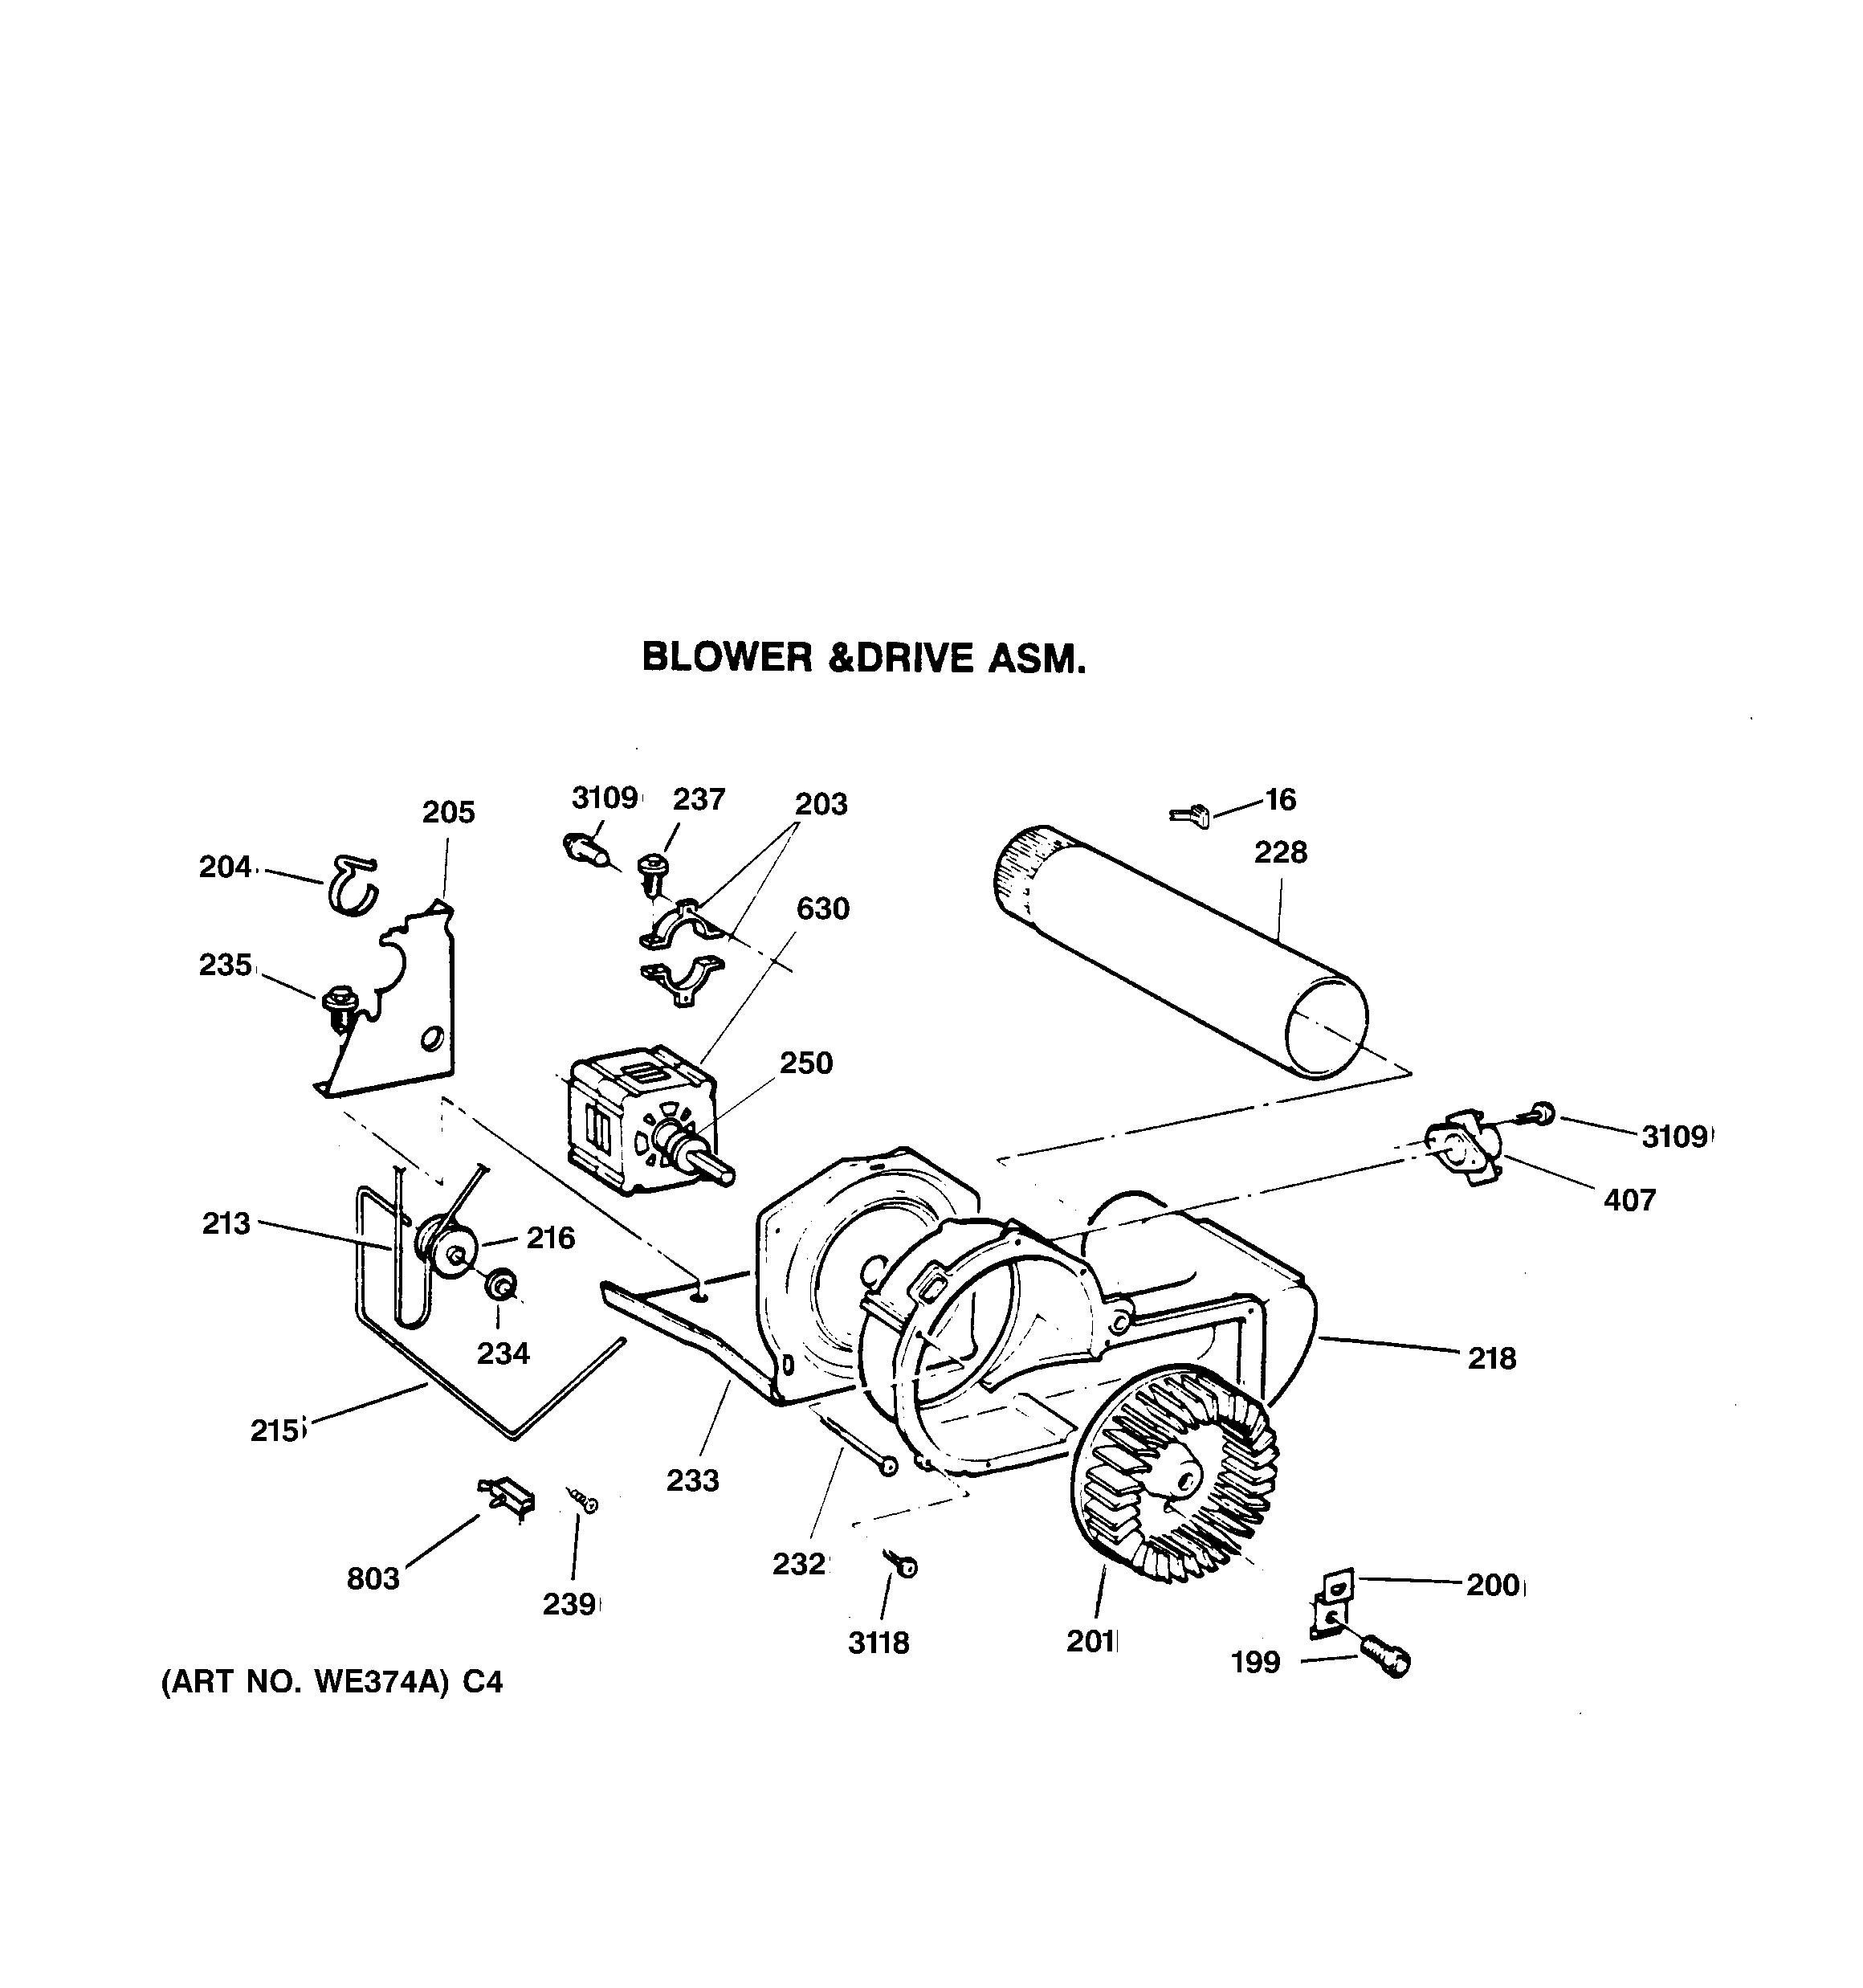 BLOWER & DRIVE ASSEMBLY